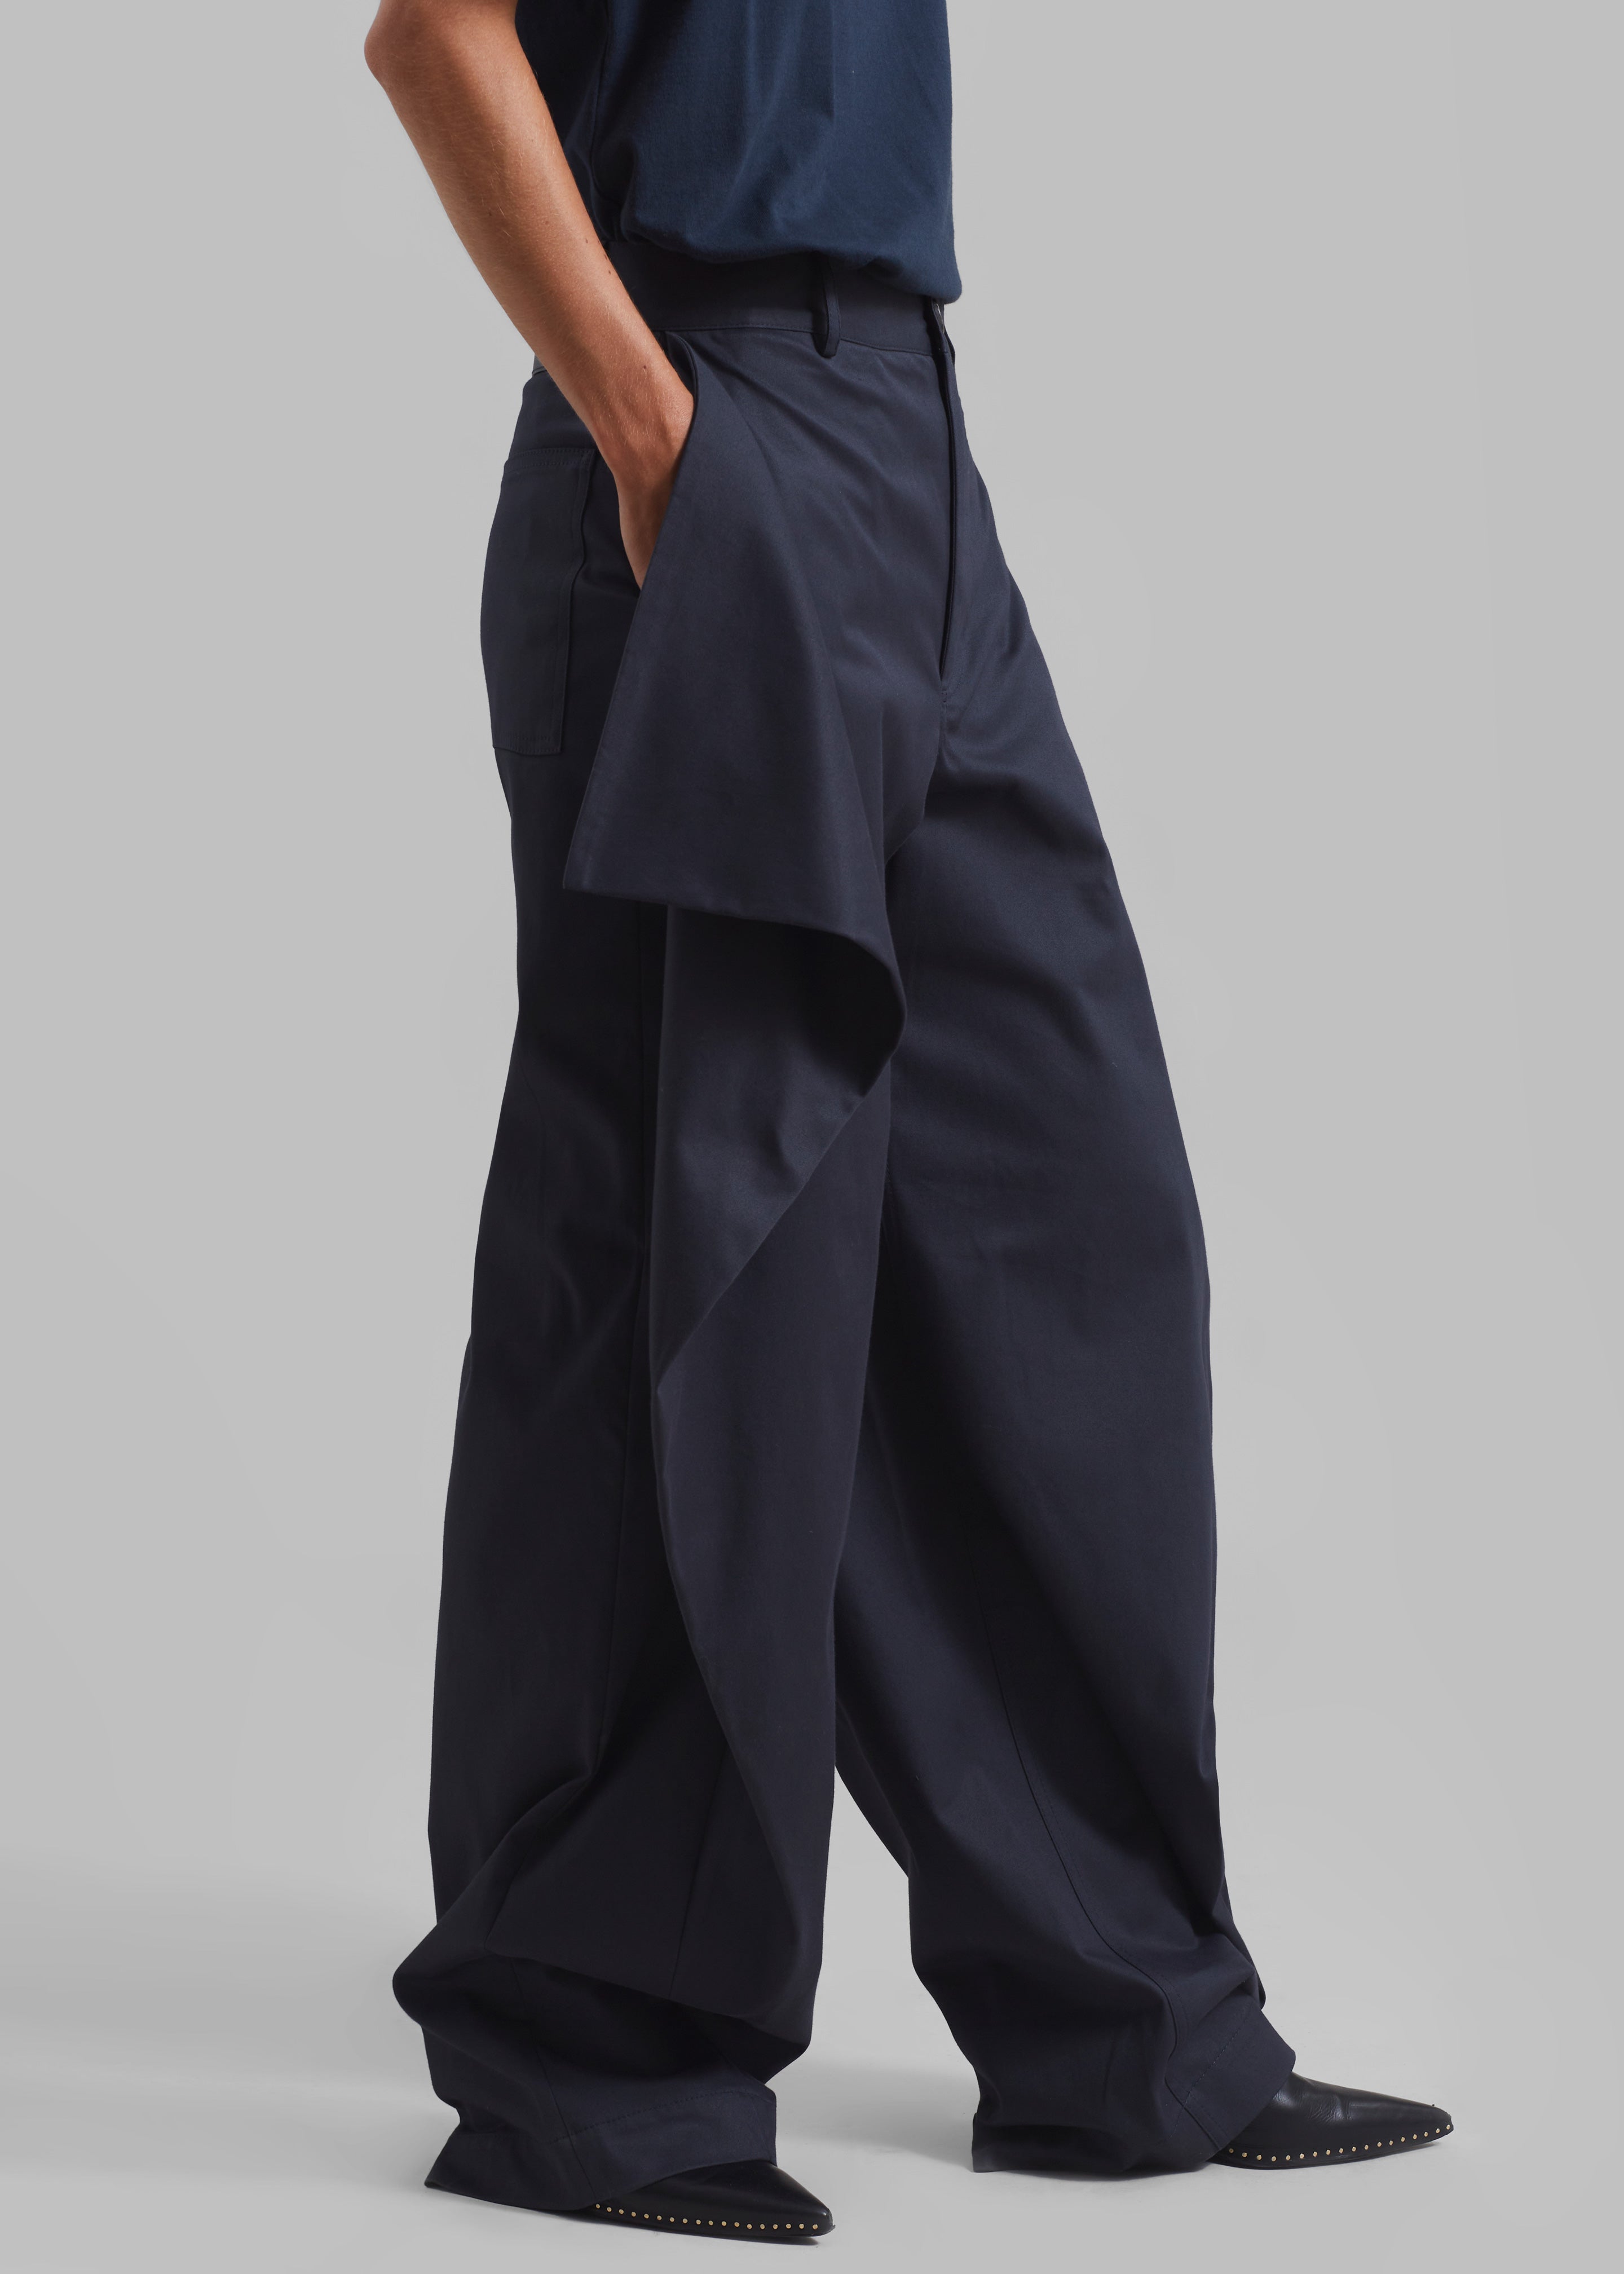 JW Anderson Kite Trousers - Navy - 5